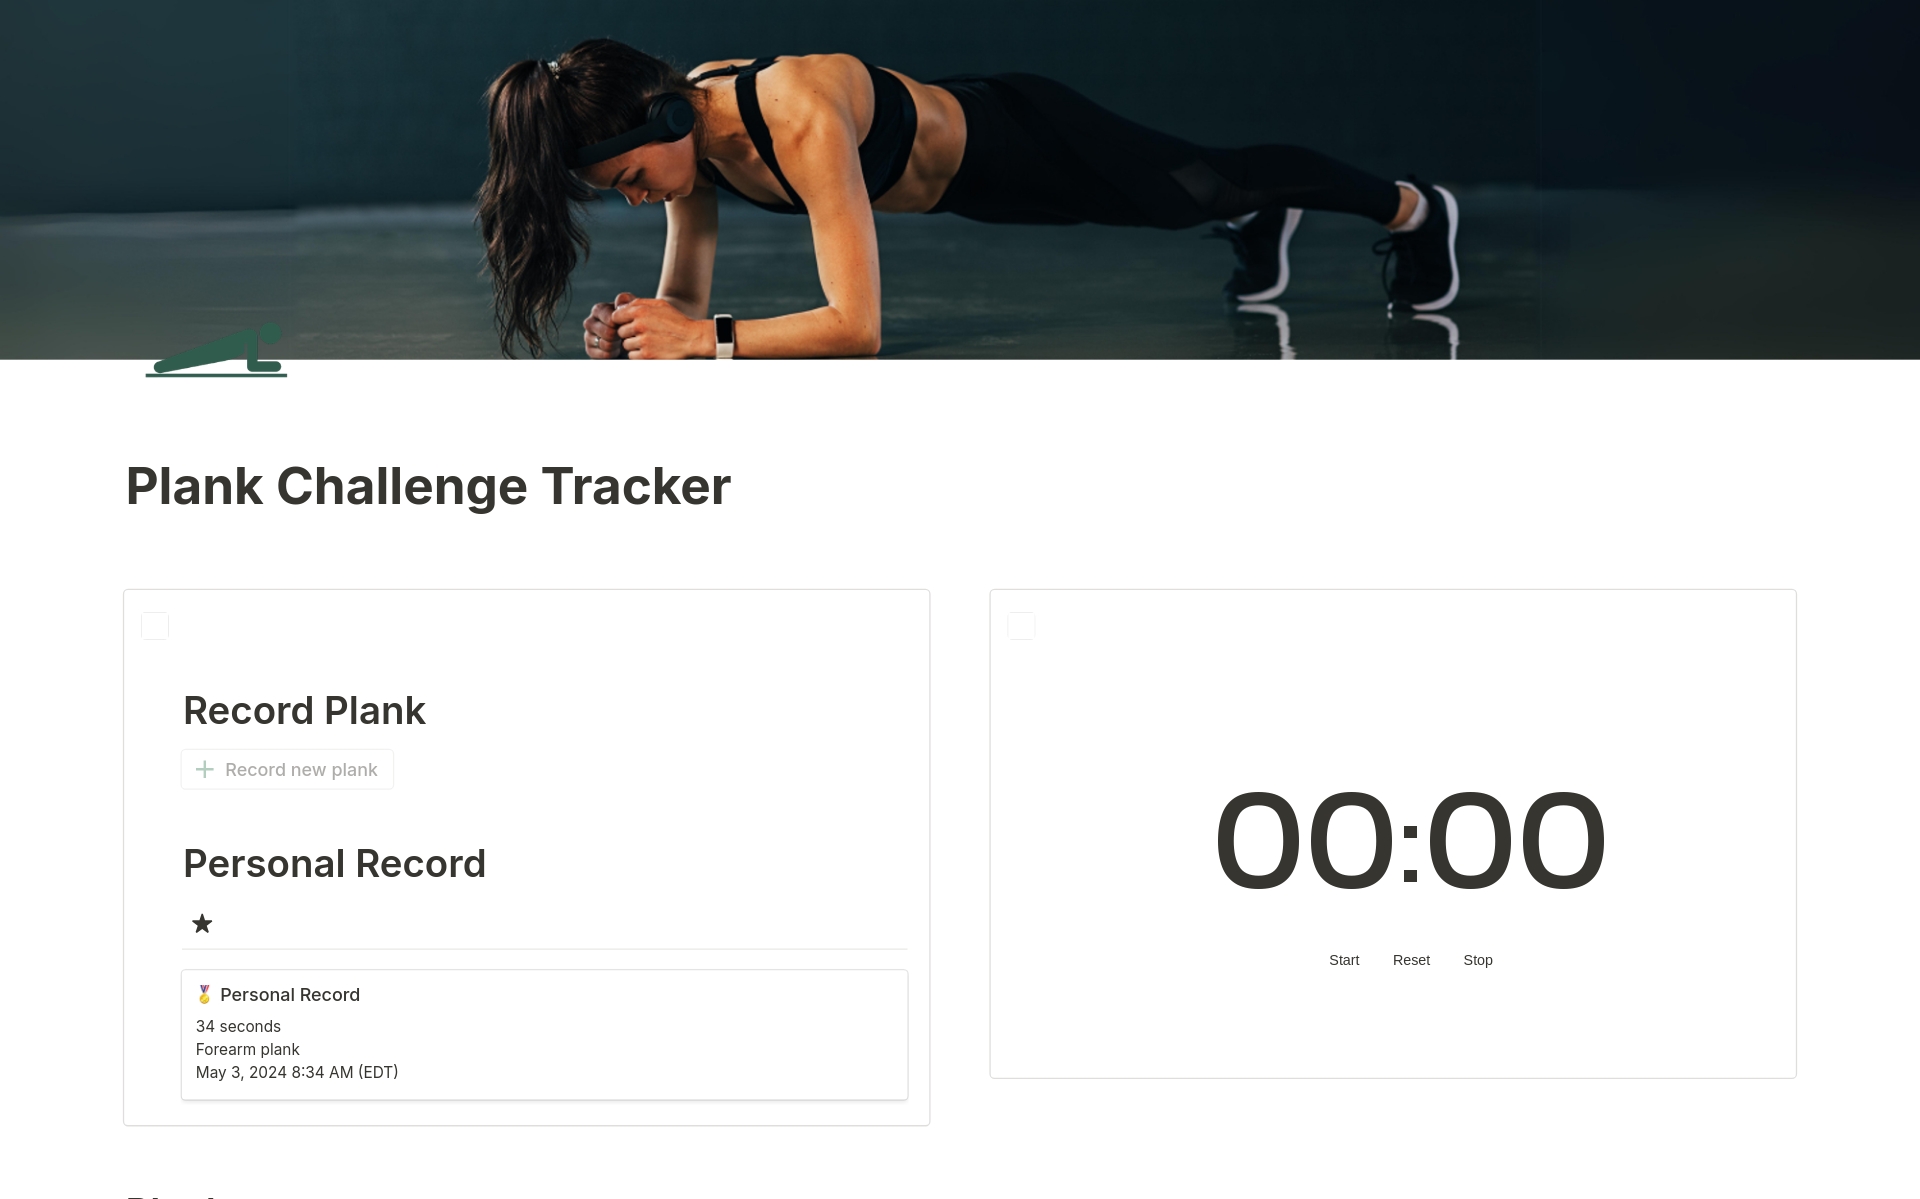 Trying to do more planks and get a core of steel? Use this Plank Challenge Tracker to record your progress. You'll get:

*A built-in stopwatch to time your planks

*An easy-add button to record the length, position, and date/time of your plank

*A personal record tracker

Enjoy!